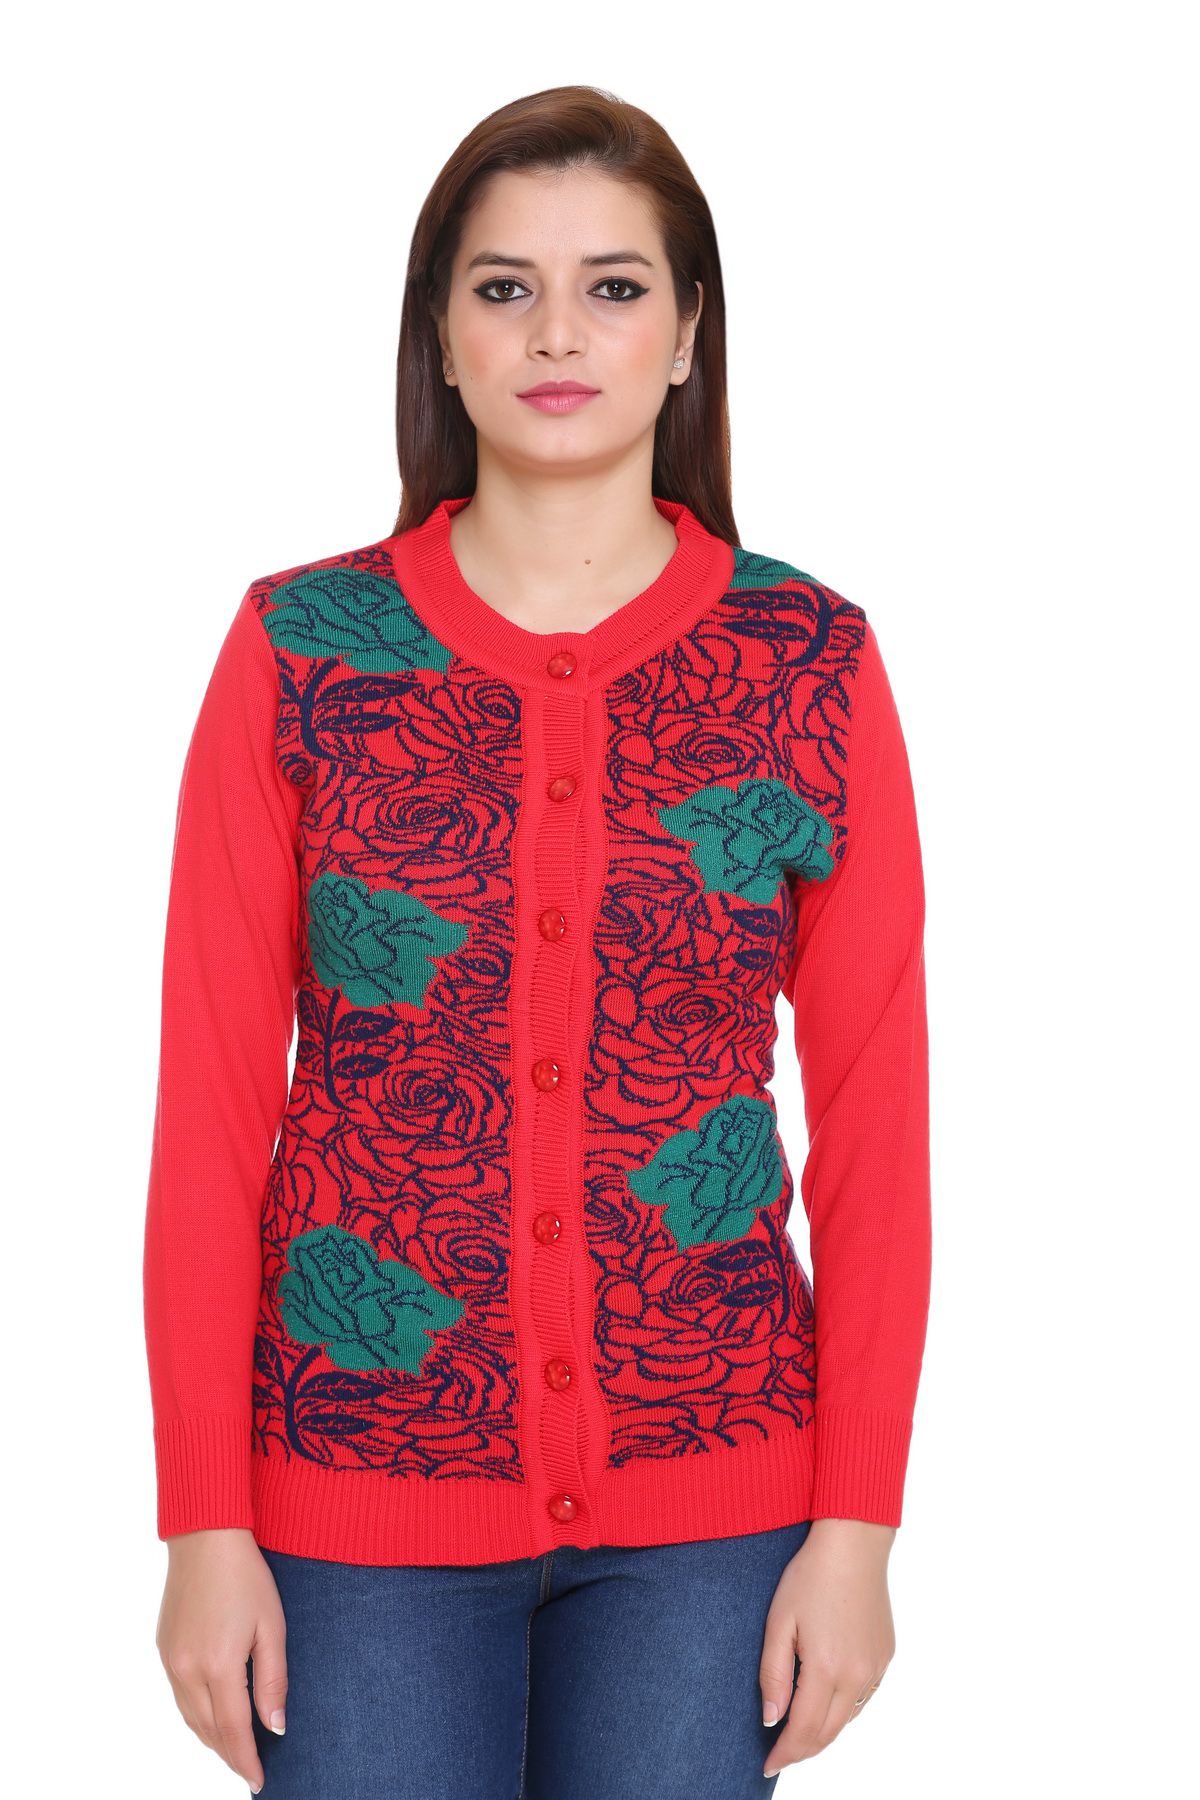 Buy Love sea Acrylic Red Cardigans Dress Online at Best Prices in India ...